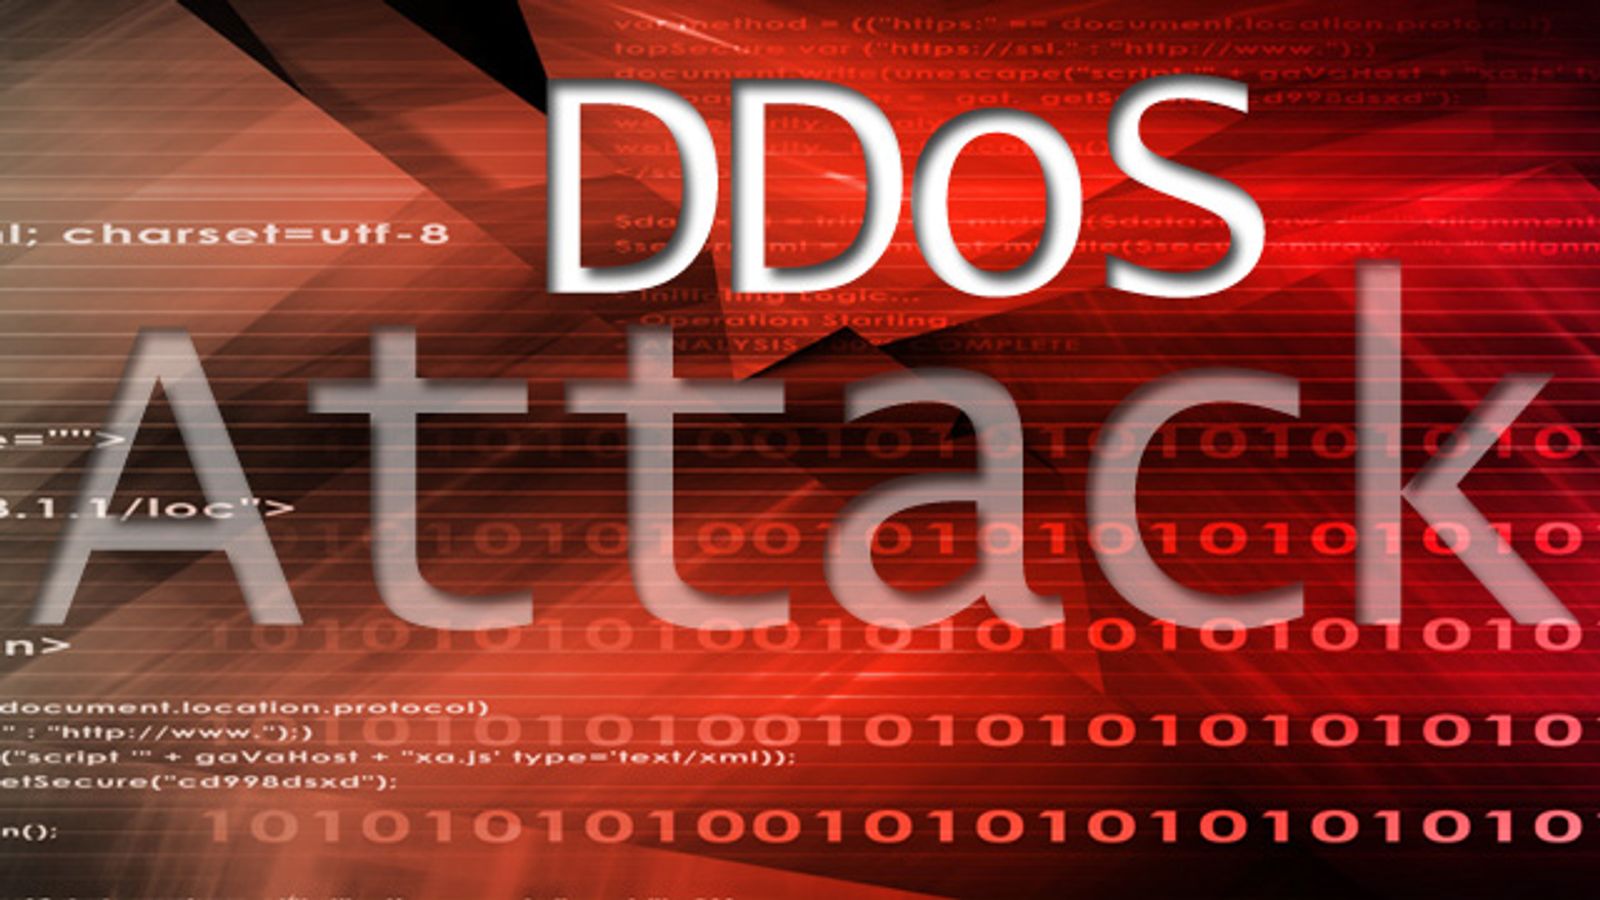 4Chan Targets Content Producer Trade Groups in DDOS Attacks